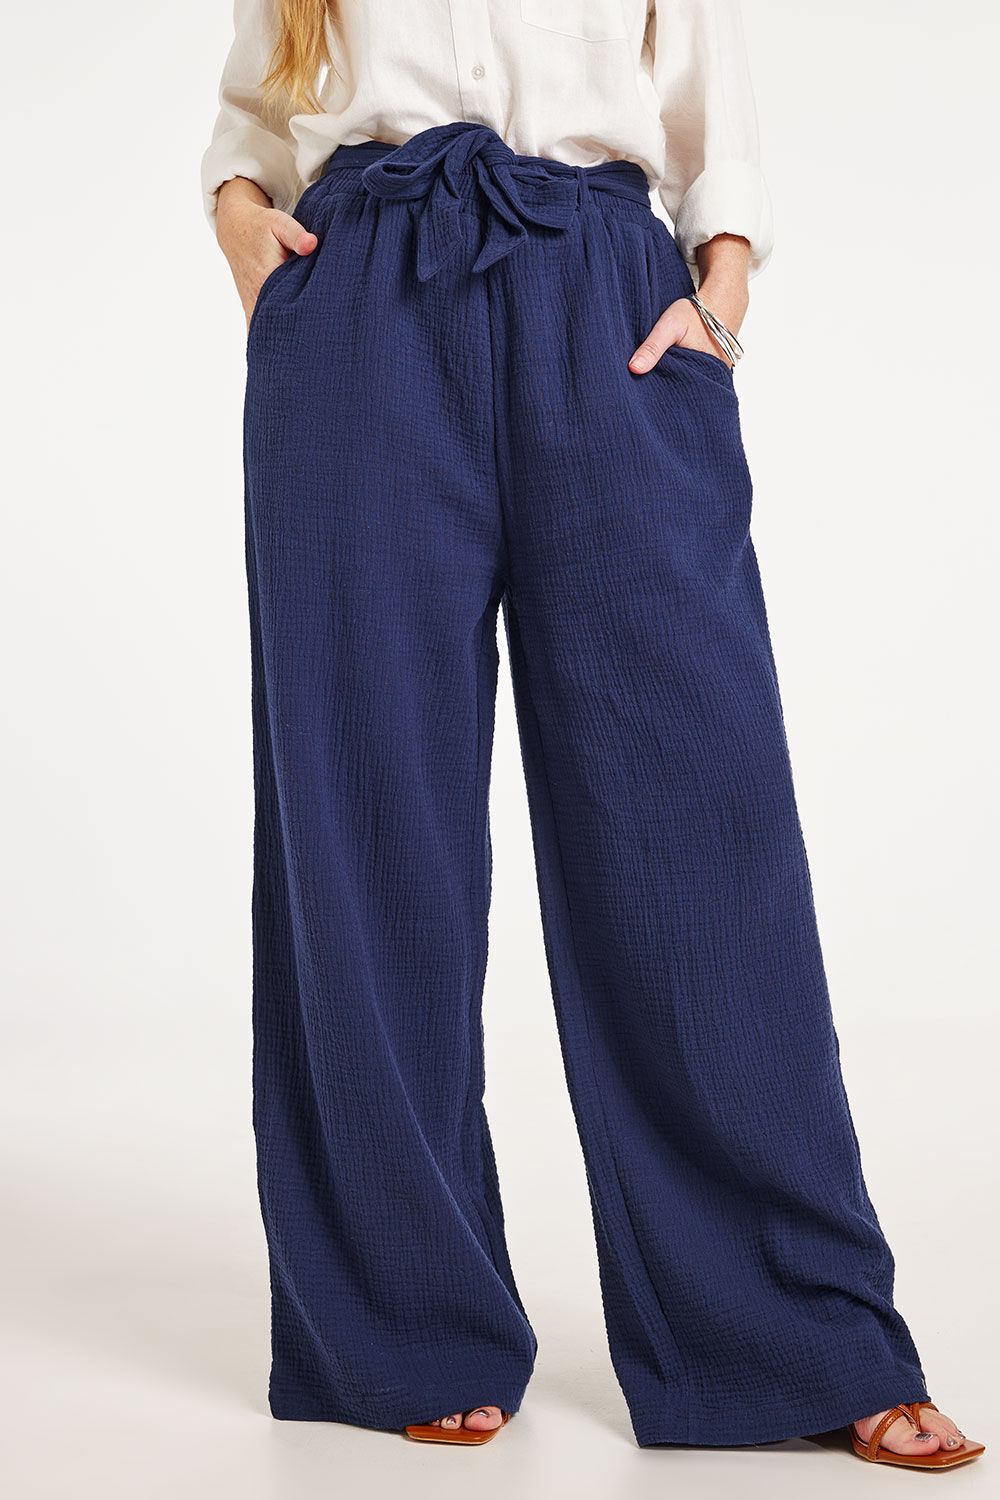 Shop Tu Clothing Women's Wide Leg Summer Trousers up to 80% Off | DealDoodle